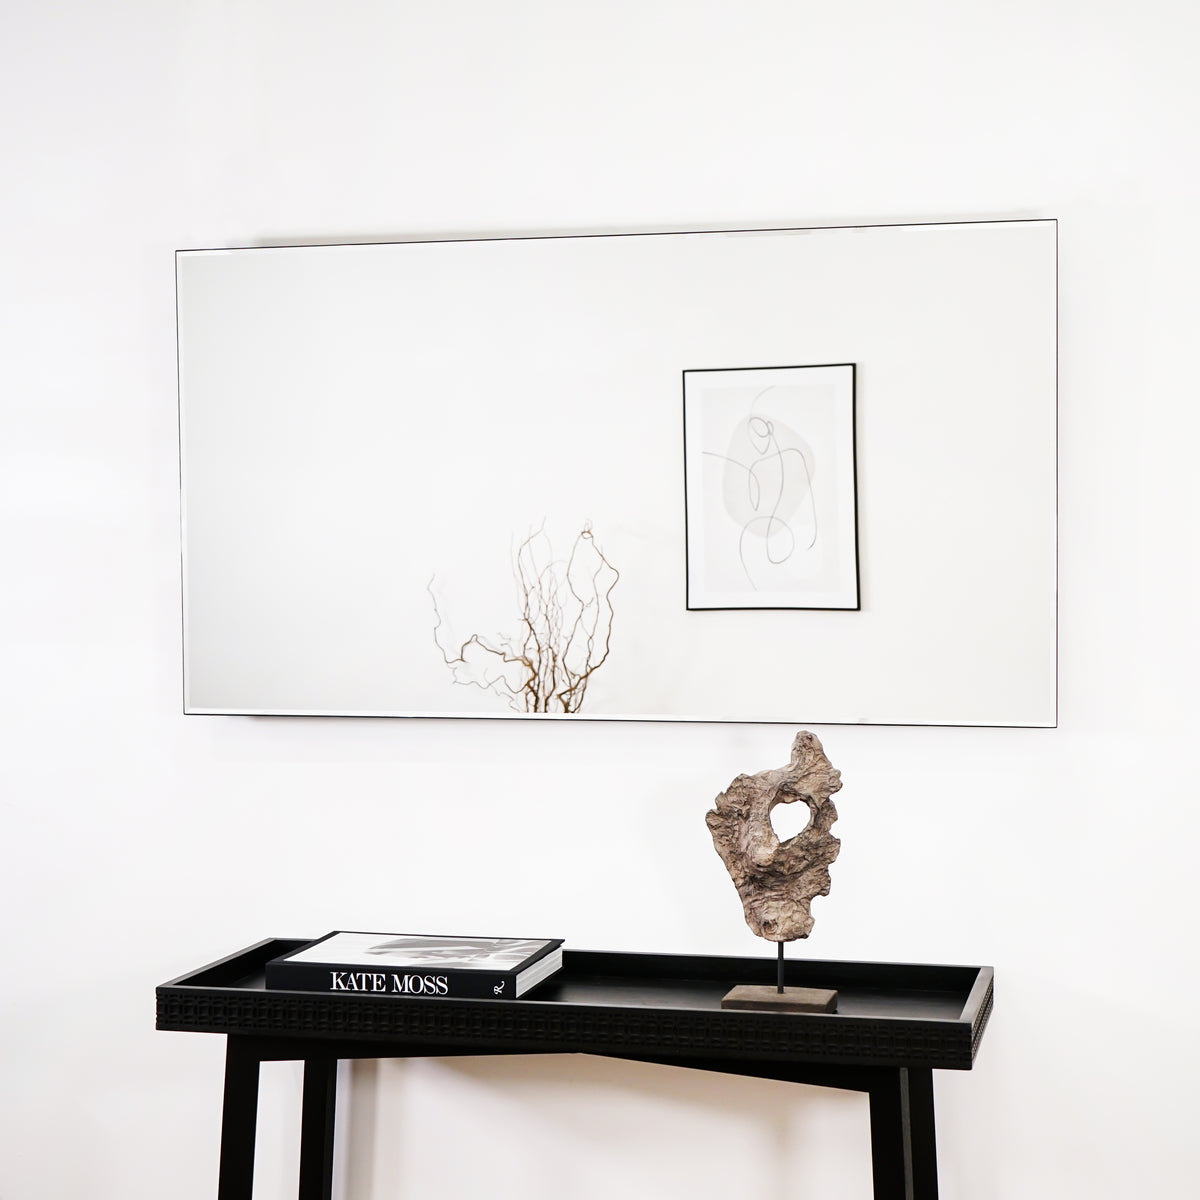 Large Frameless Rectangular Console Mirror above console table, reflecting painting